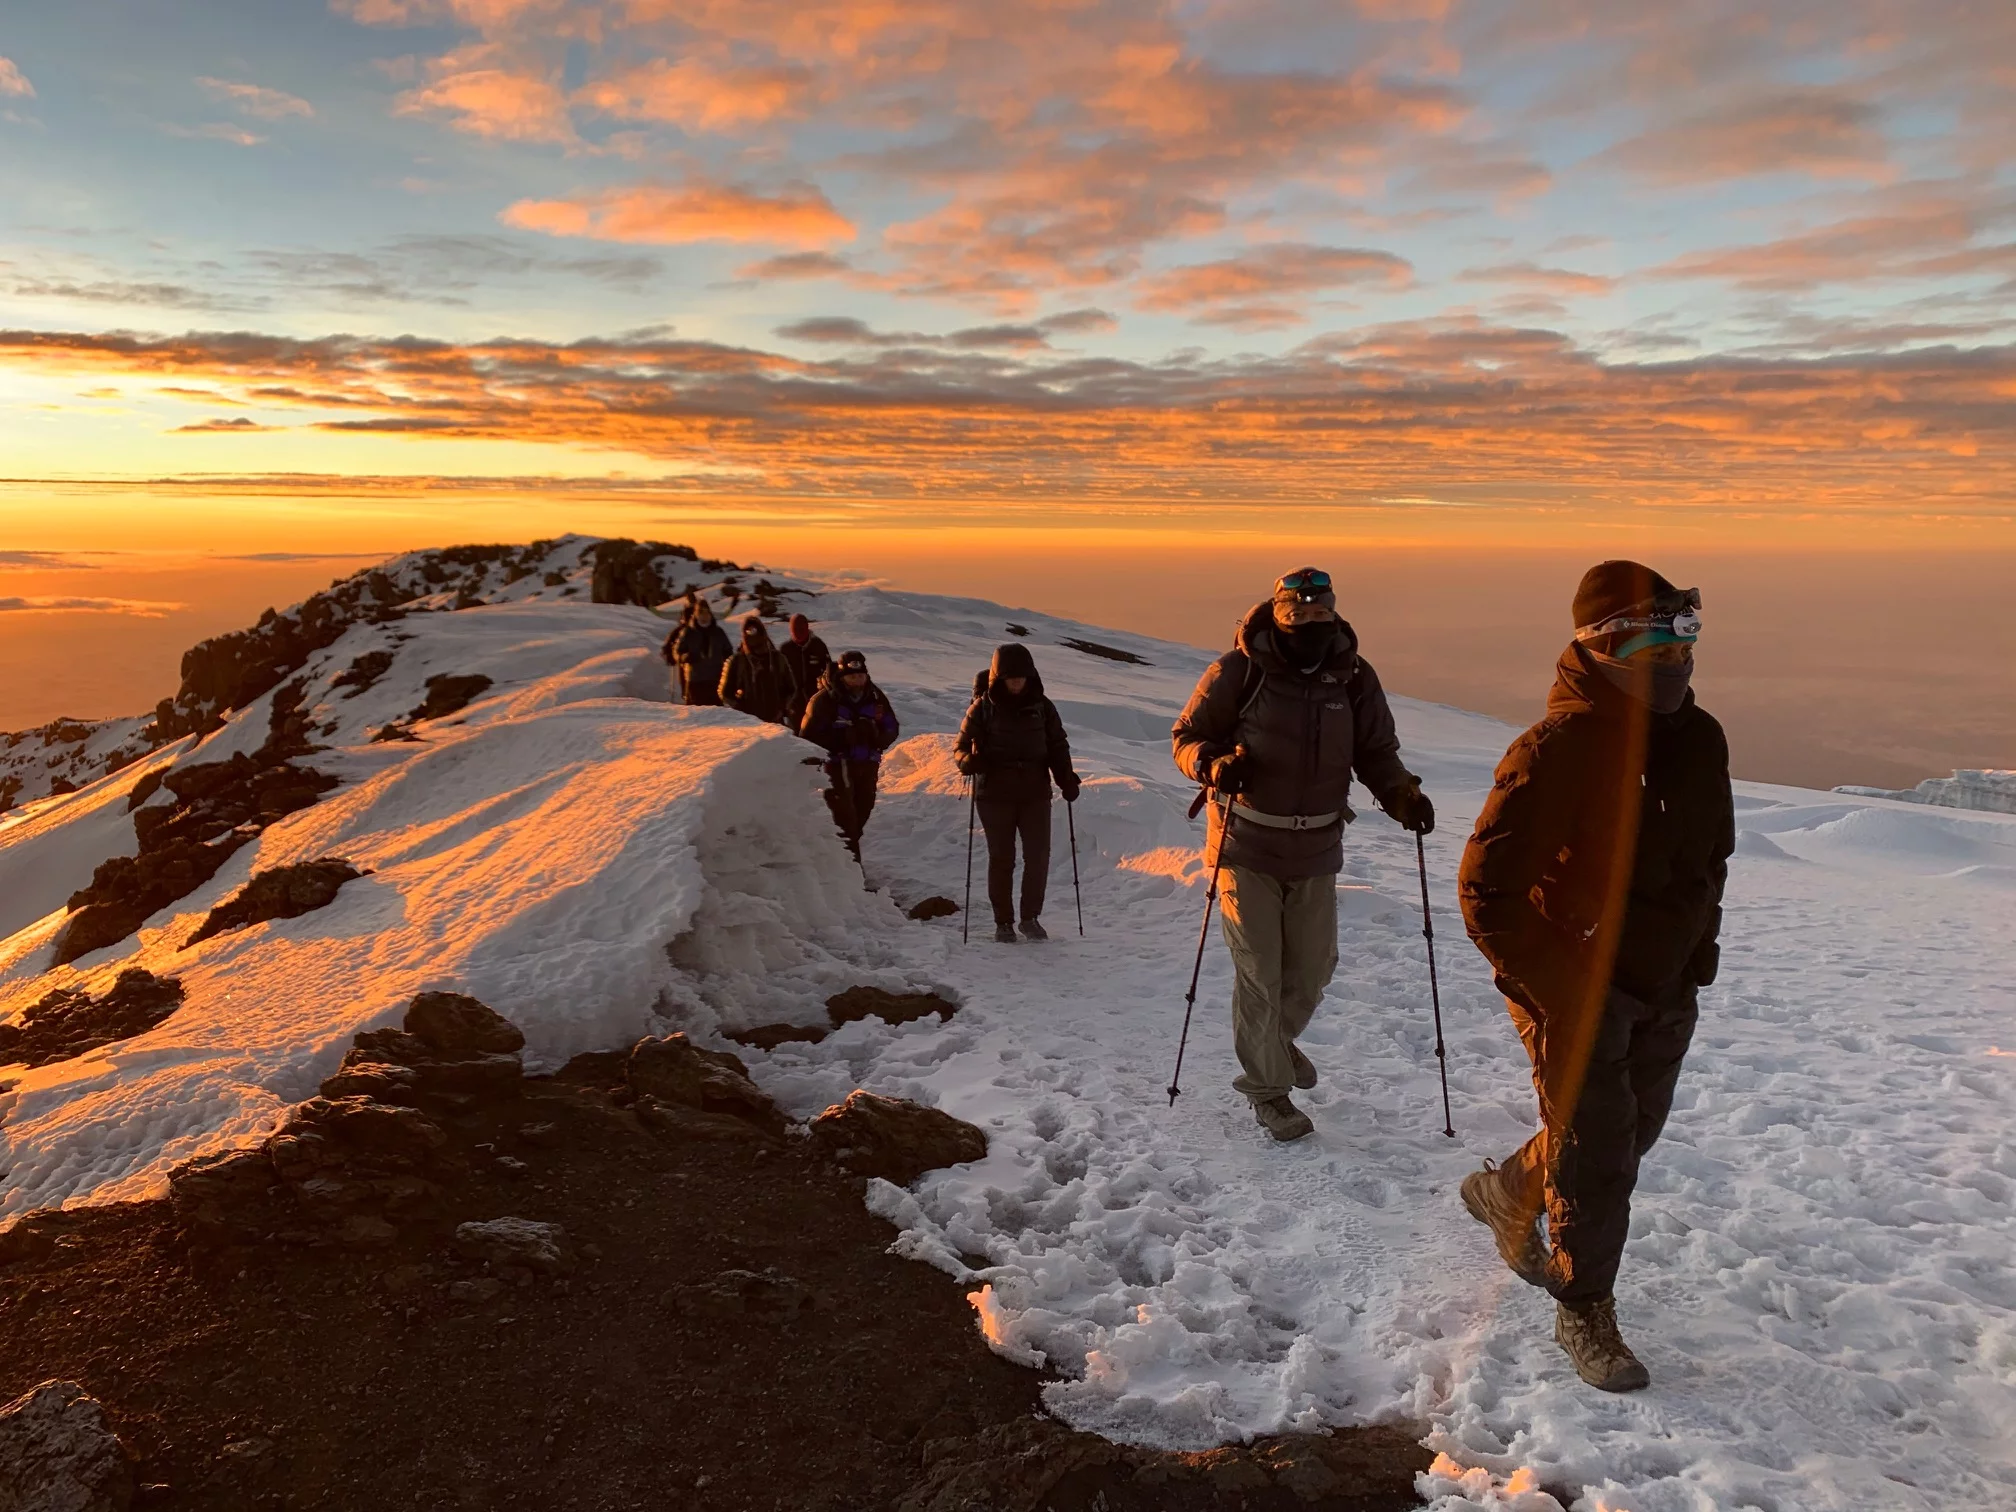 6- 7 Day Machame Route – the most popular route on mount kilimanjaro